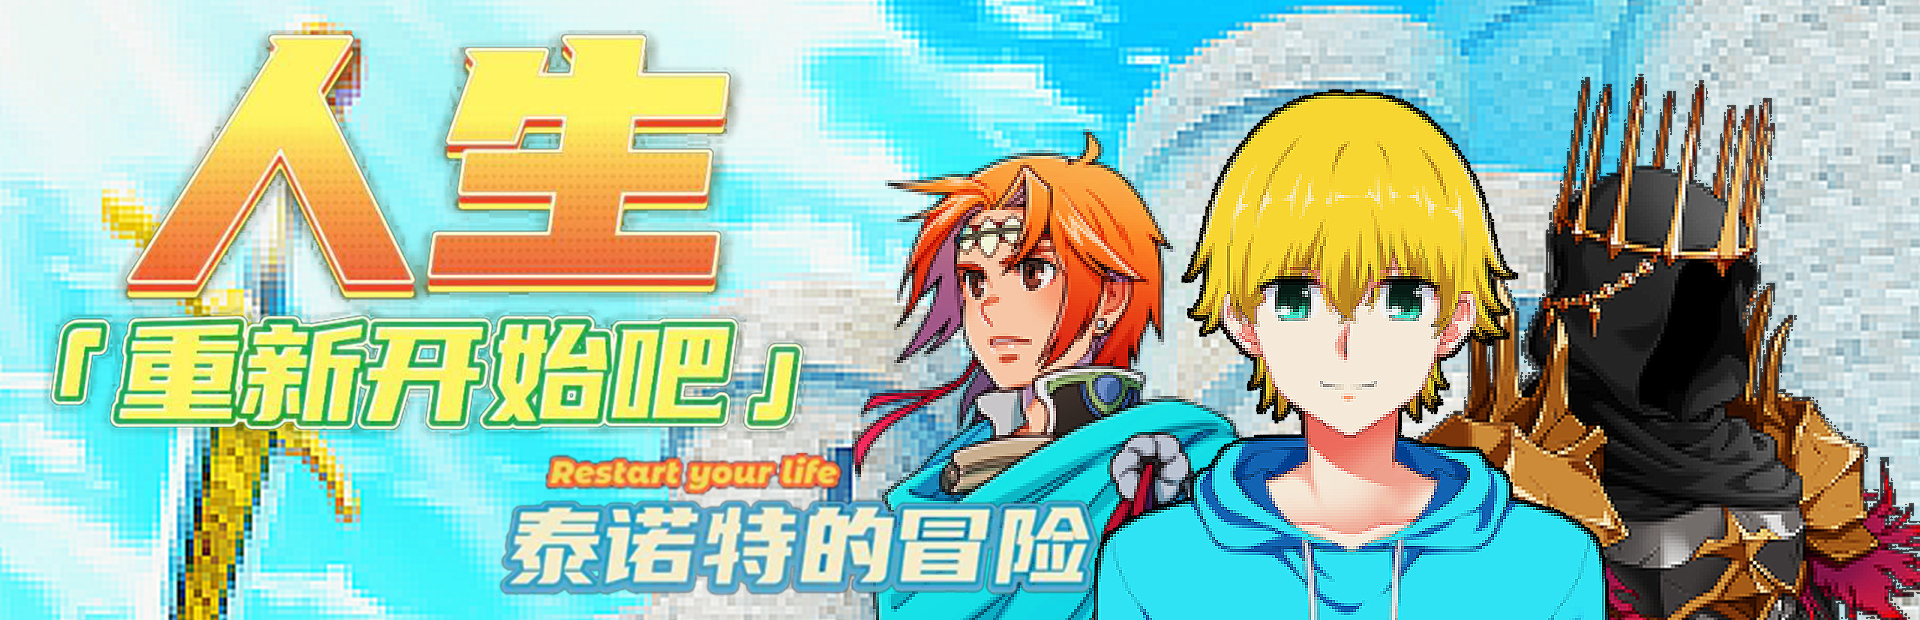 Restart your life Adventures of Tainuote Demo